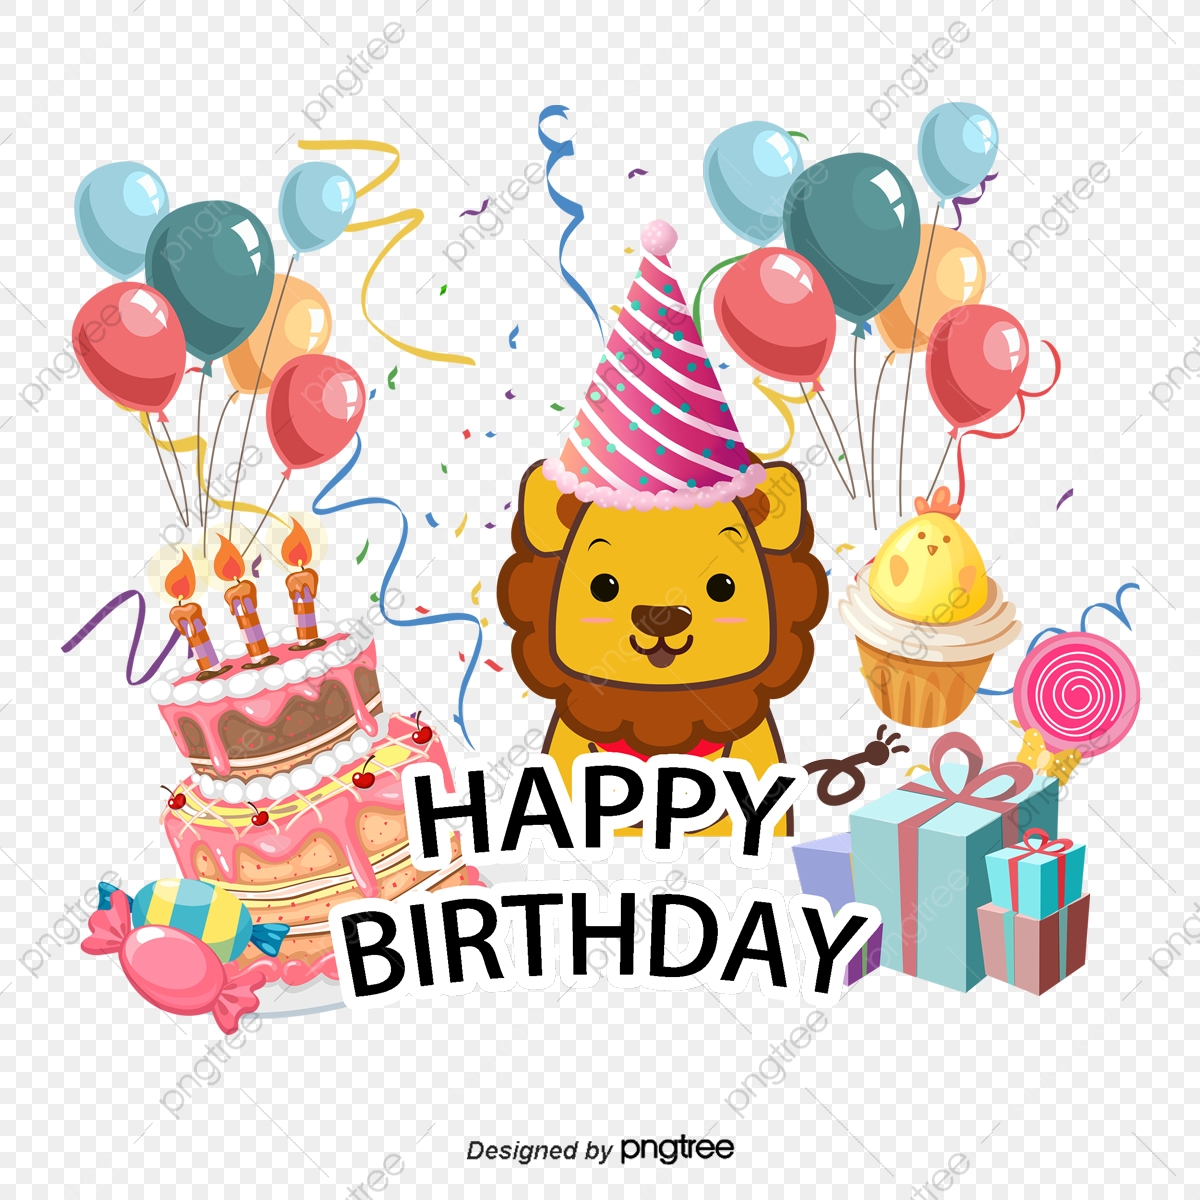 Happy Birthday Vector Free Download at Vectorified.com | Collection of